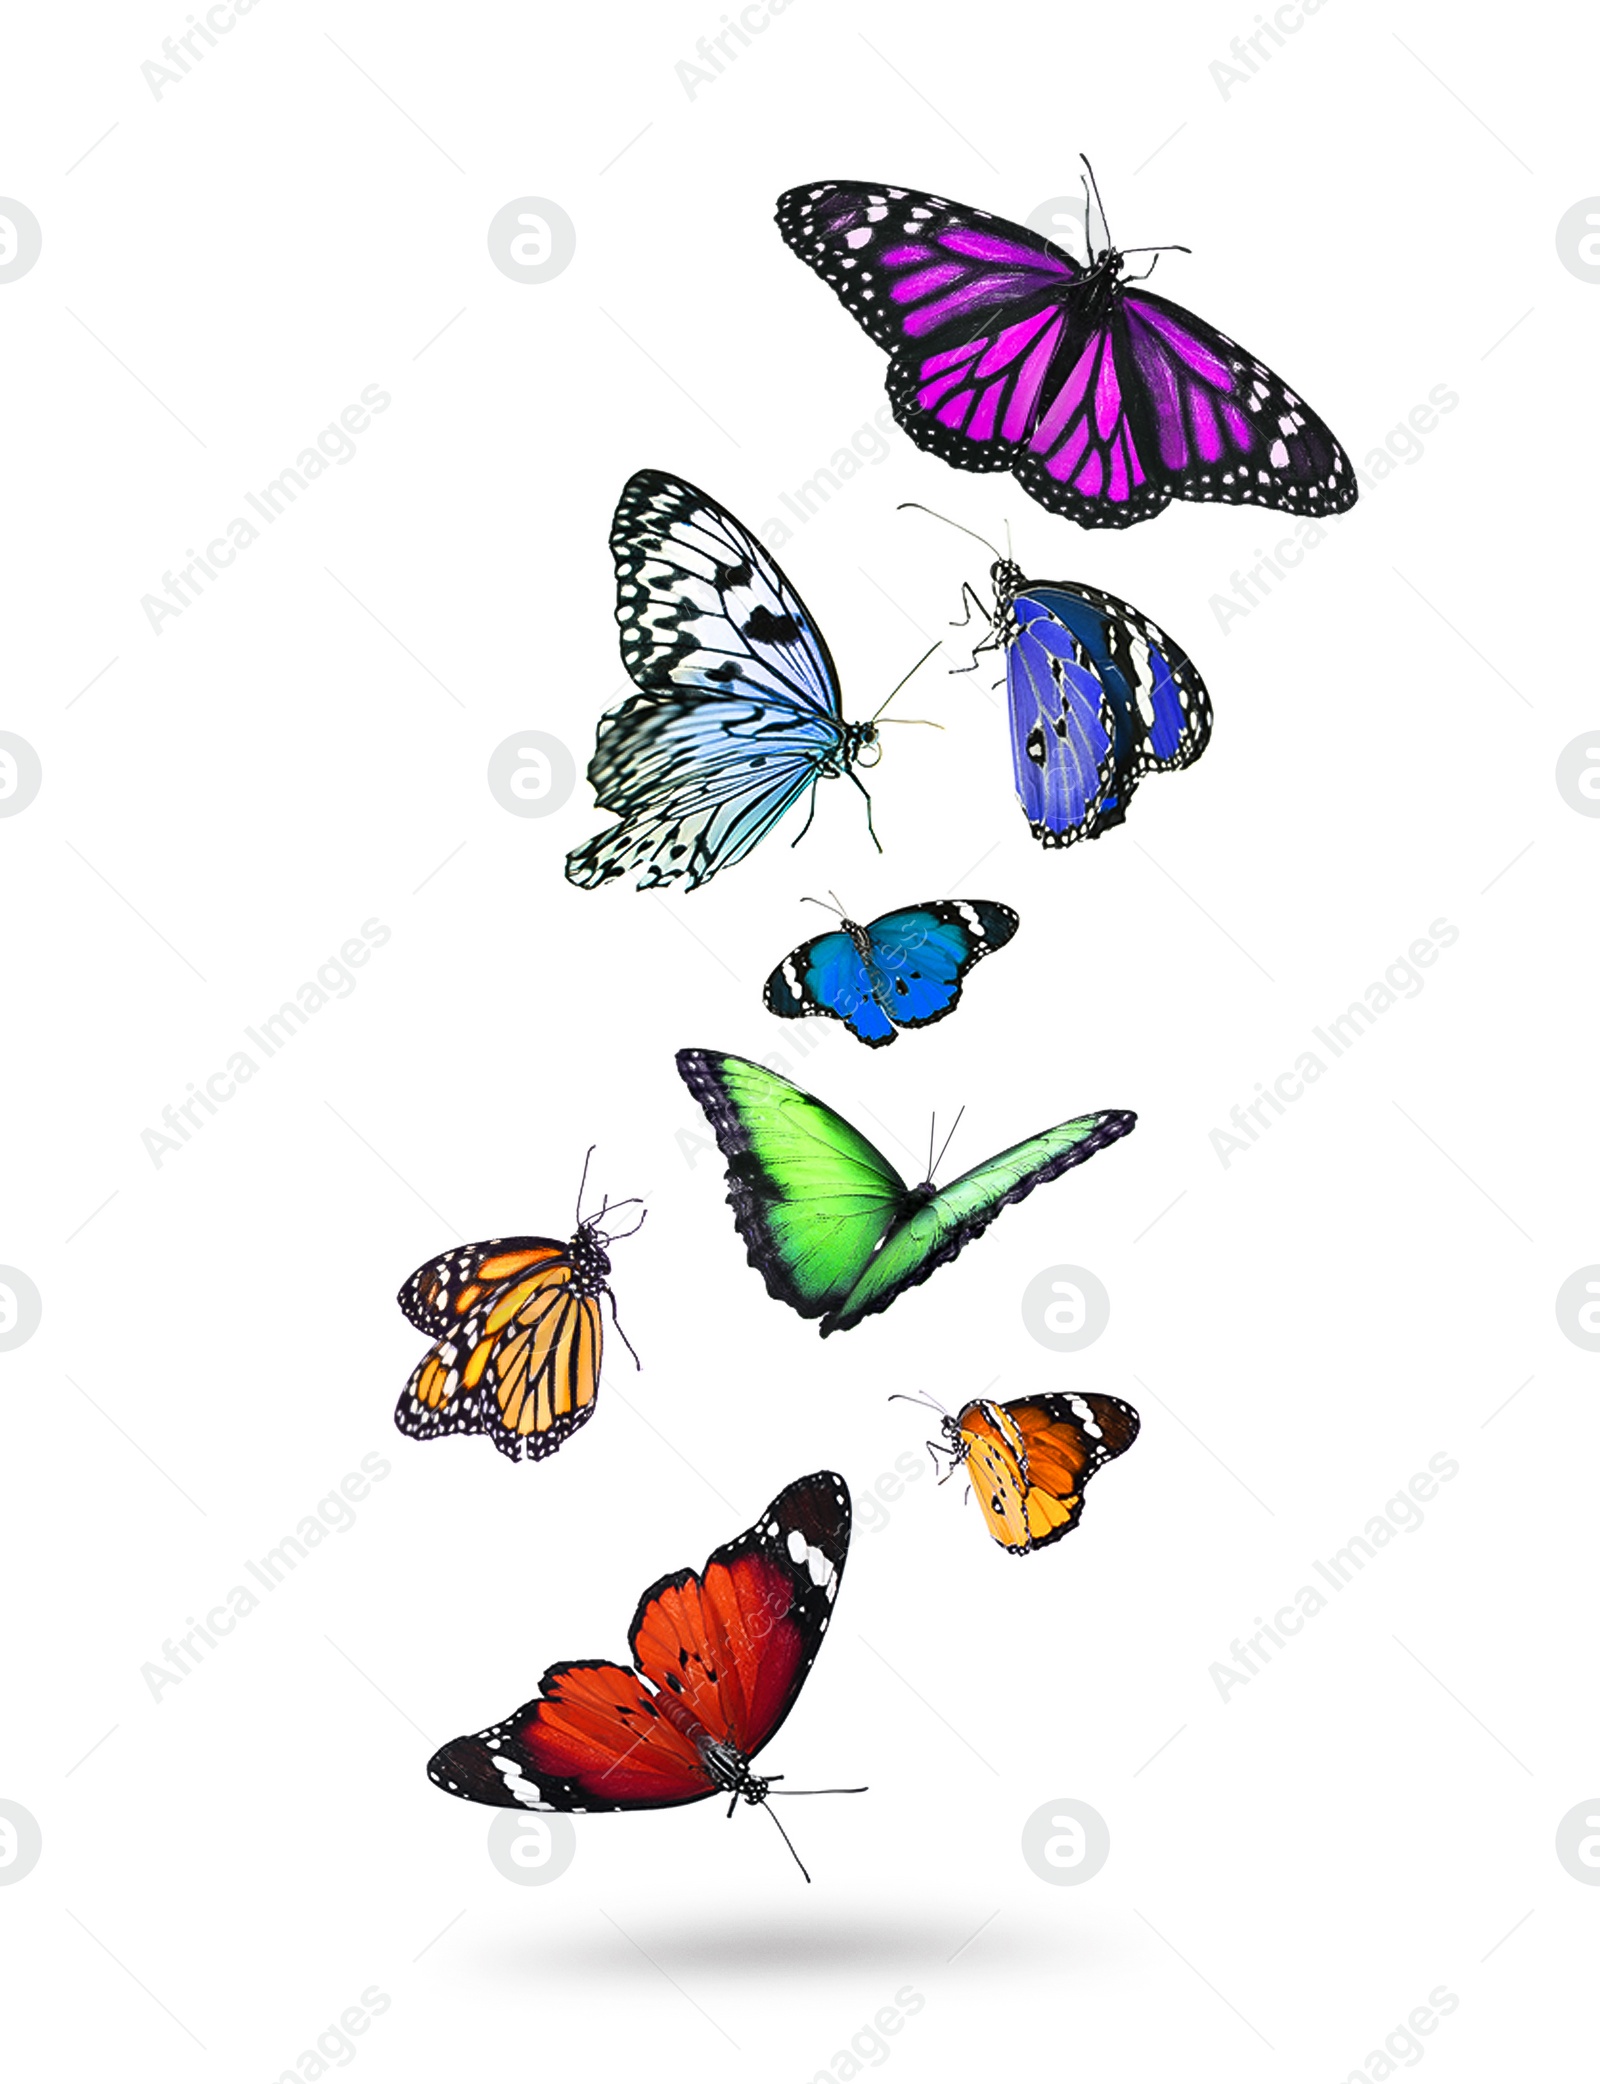 Image of Many beautiful flying colorful butterflies on white background